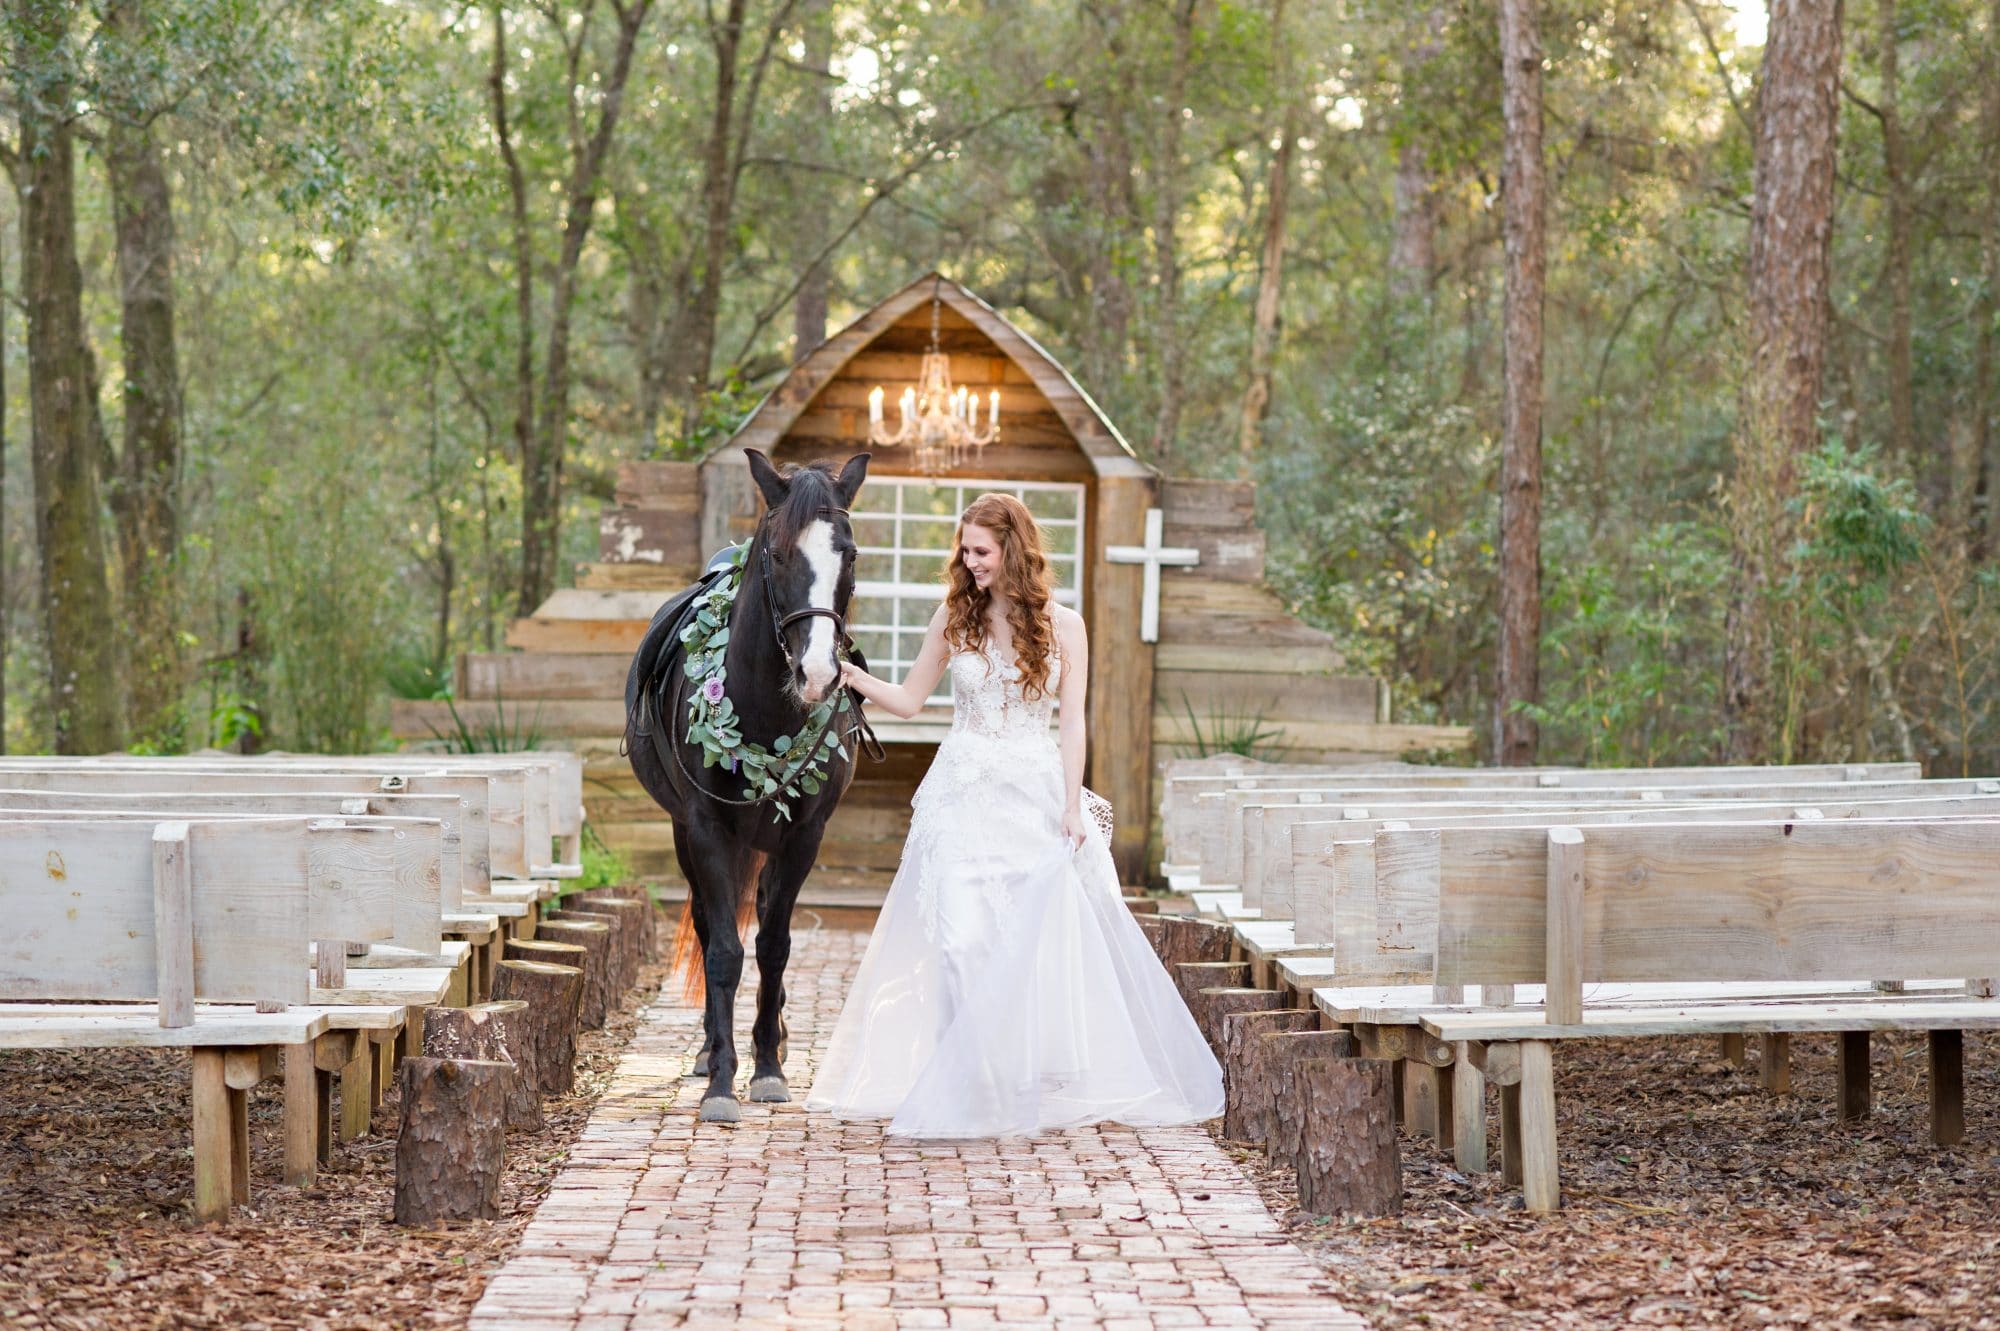 Bridle Oaks Barn - bride leading horse through woodsy outdoor ceremony space